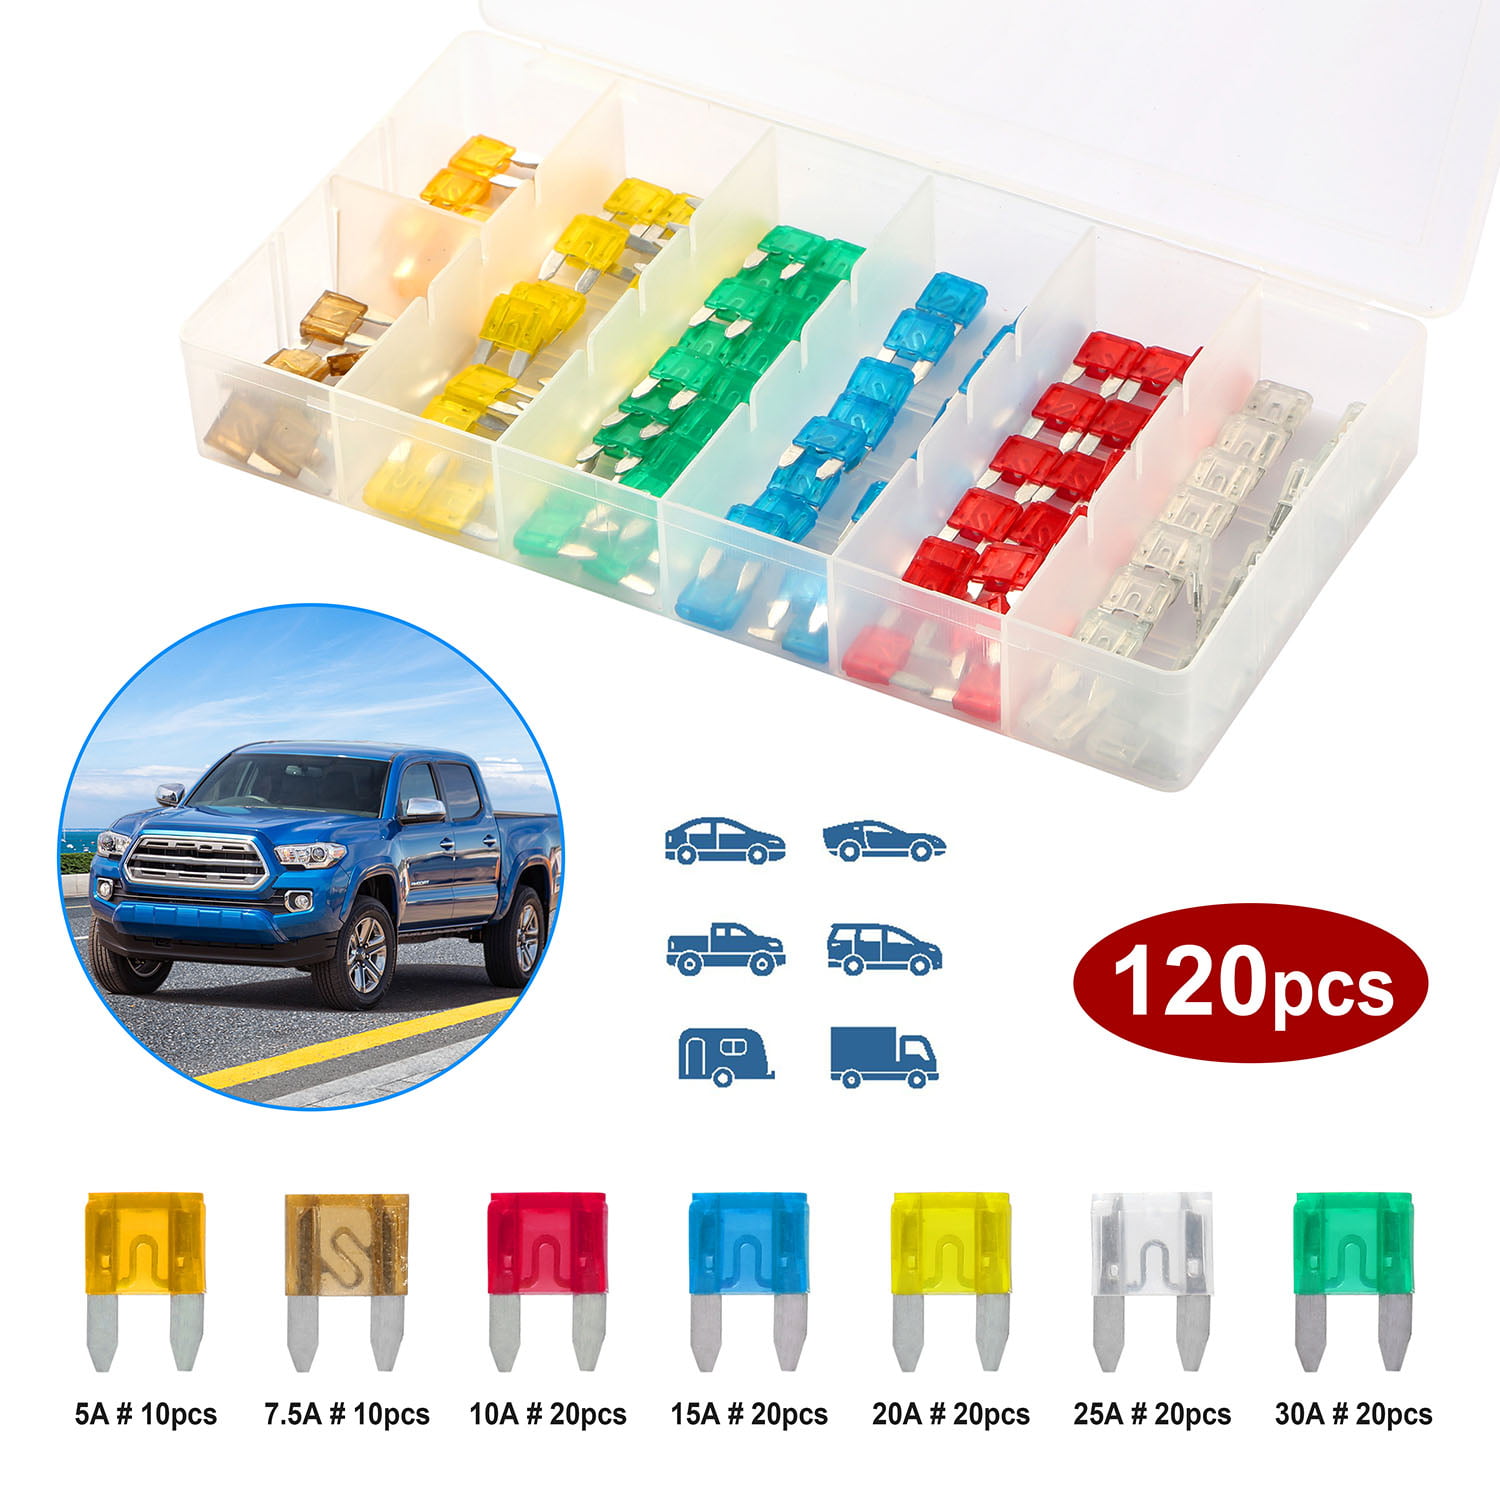 25A 10A 35A 20A Assorted Standard Blade Fuse Assortment Kit FULARR 80Pcs Professional Car Truck Boat Fuse 15A 5A 7.5 A 30A 3A with Replacement Fuses Puller –– 2A 